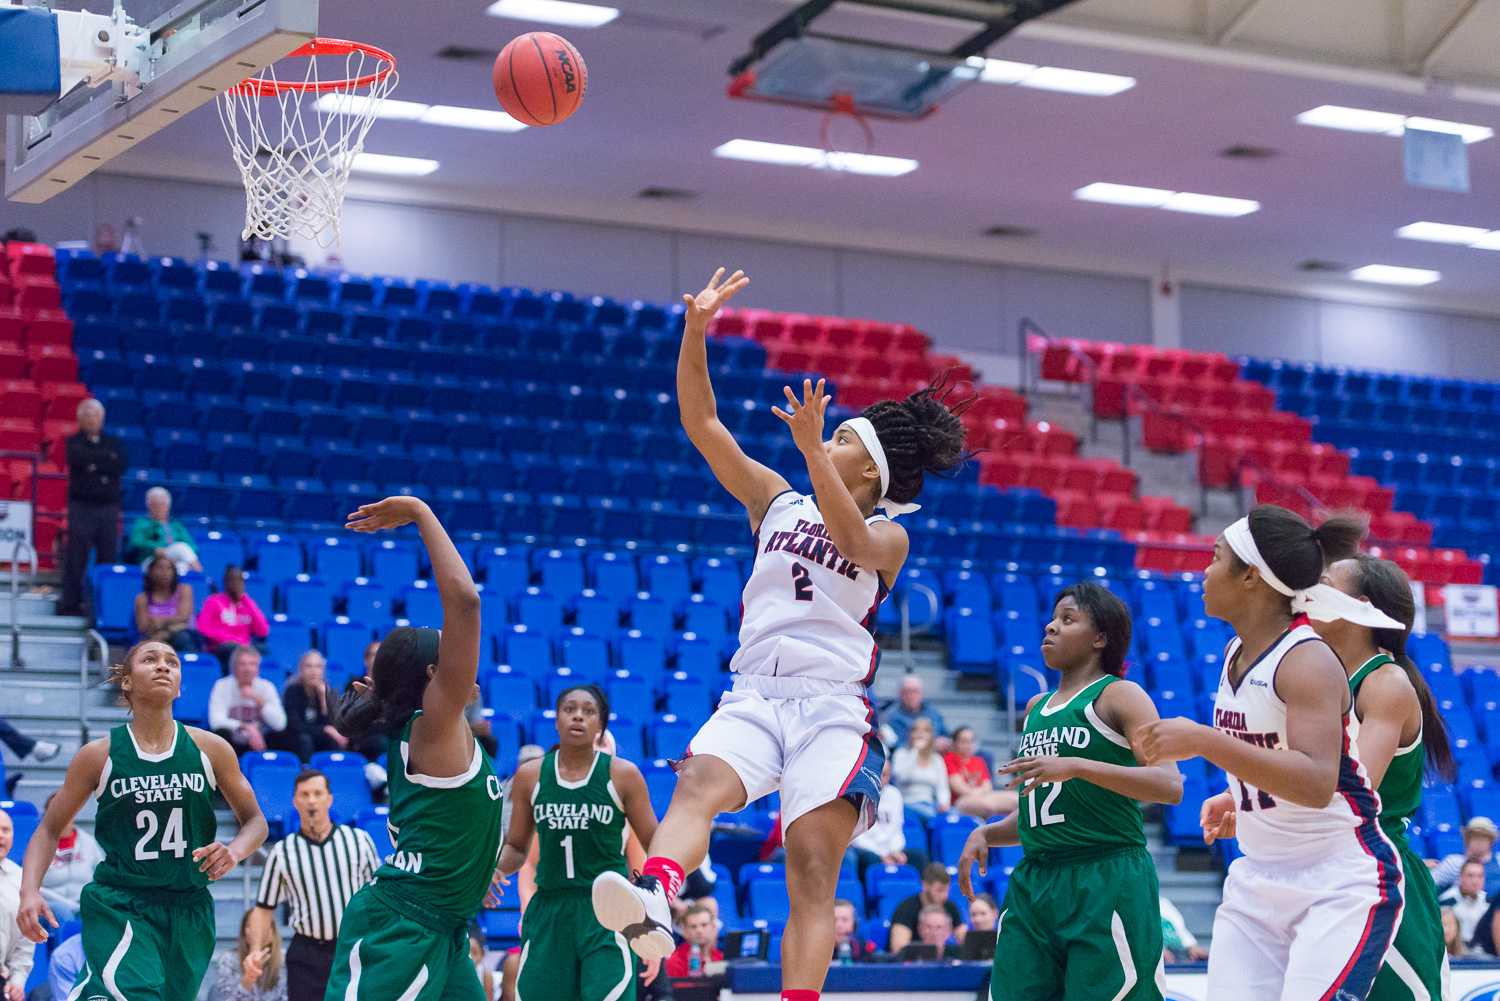 FAU guard Shaneese Bailey takes a successful jump shot in the second half to widen the Owls’ lead to three at 52-49. 